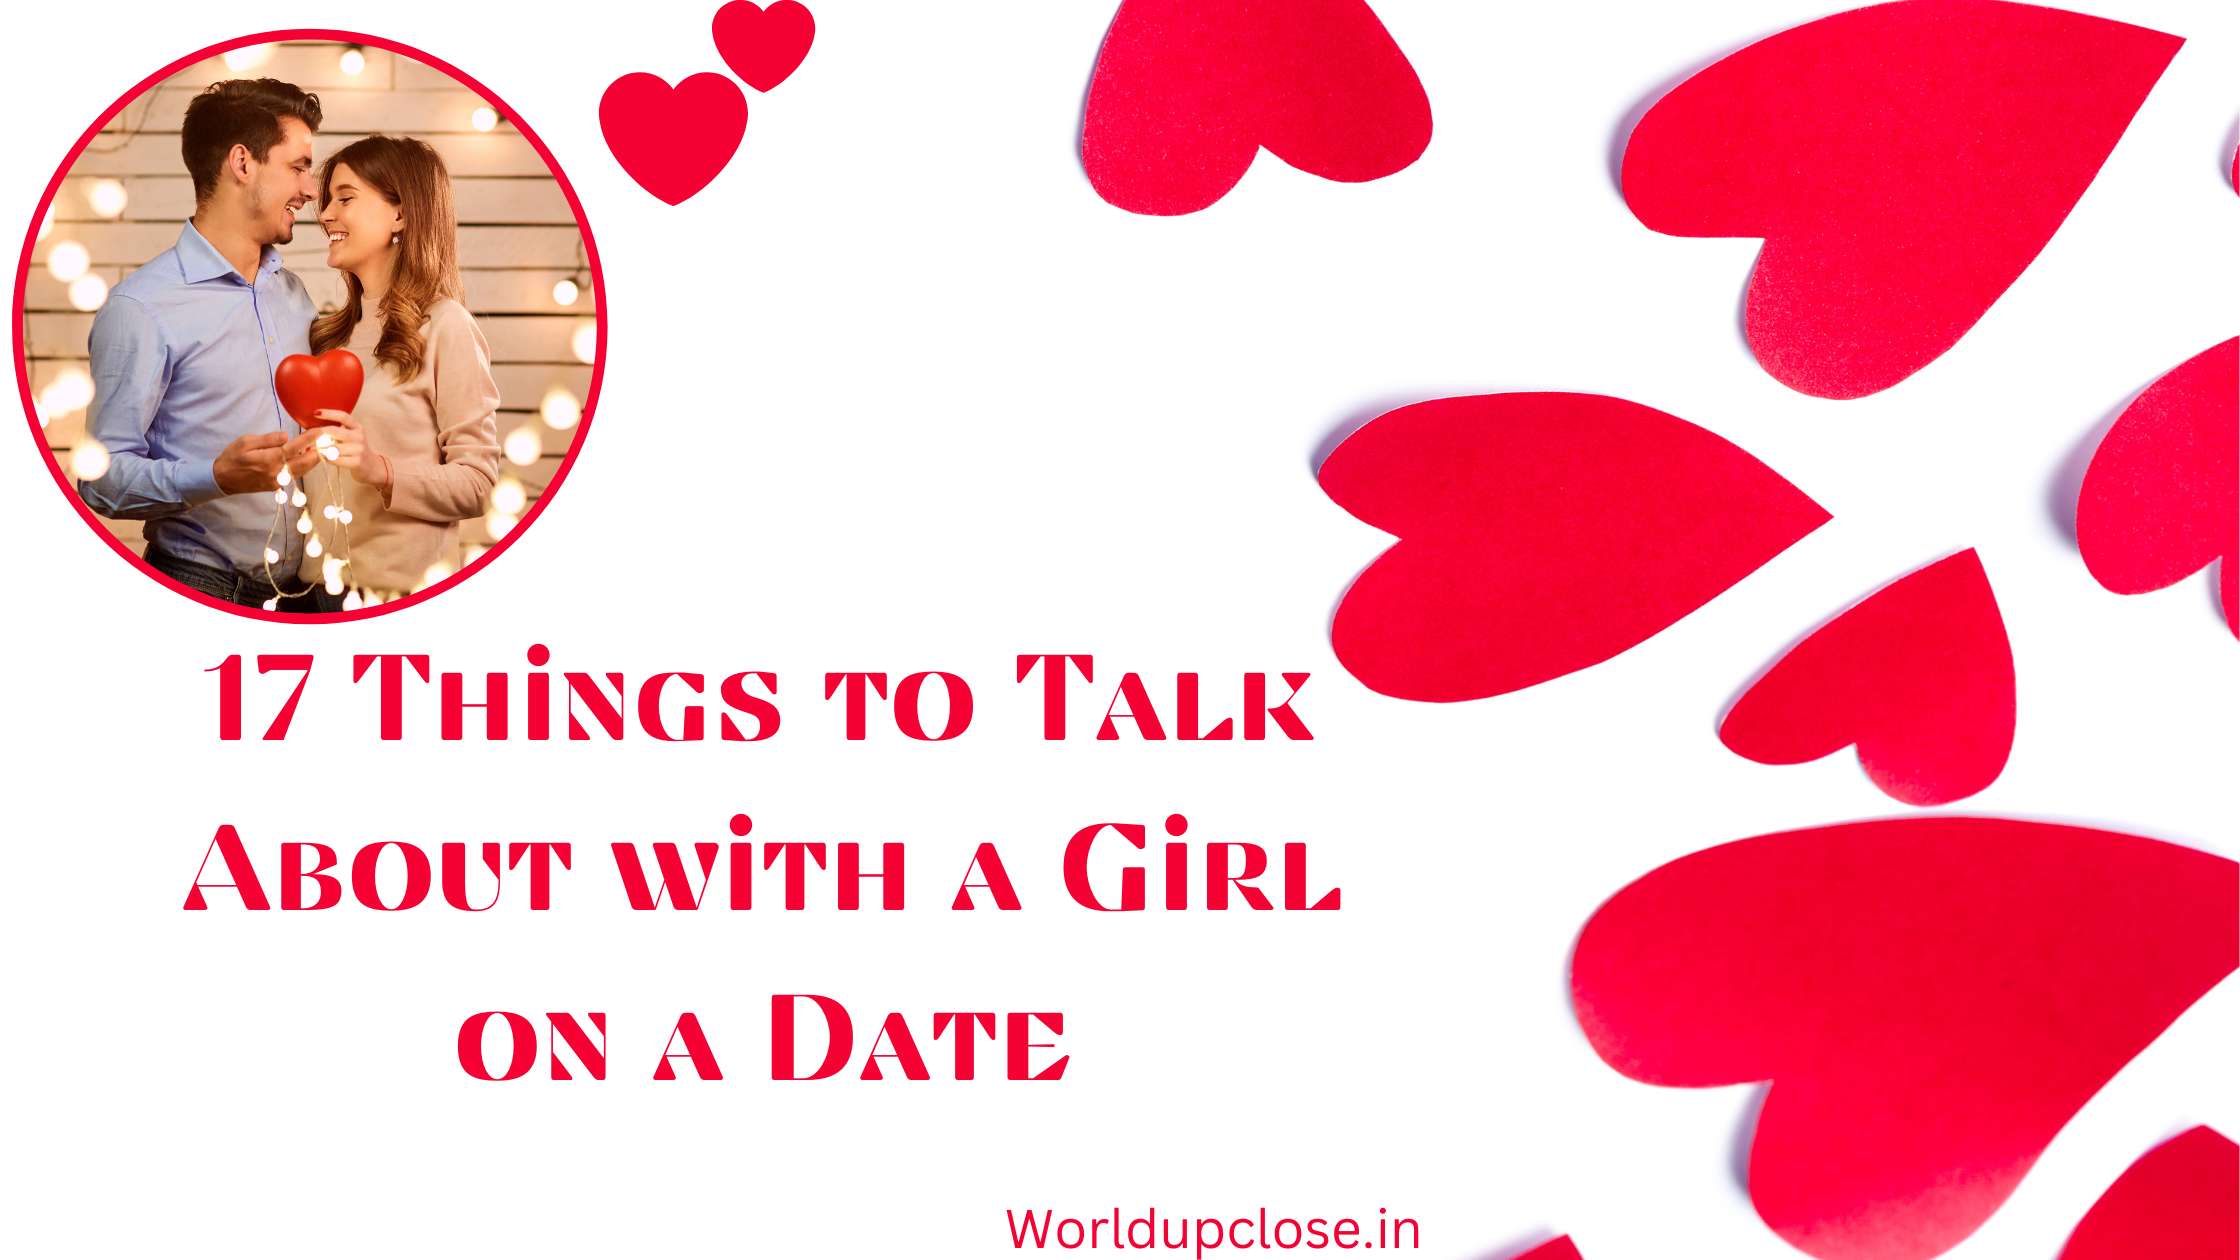 17 Things to Talk About with a Girl on a Date 1